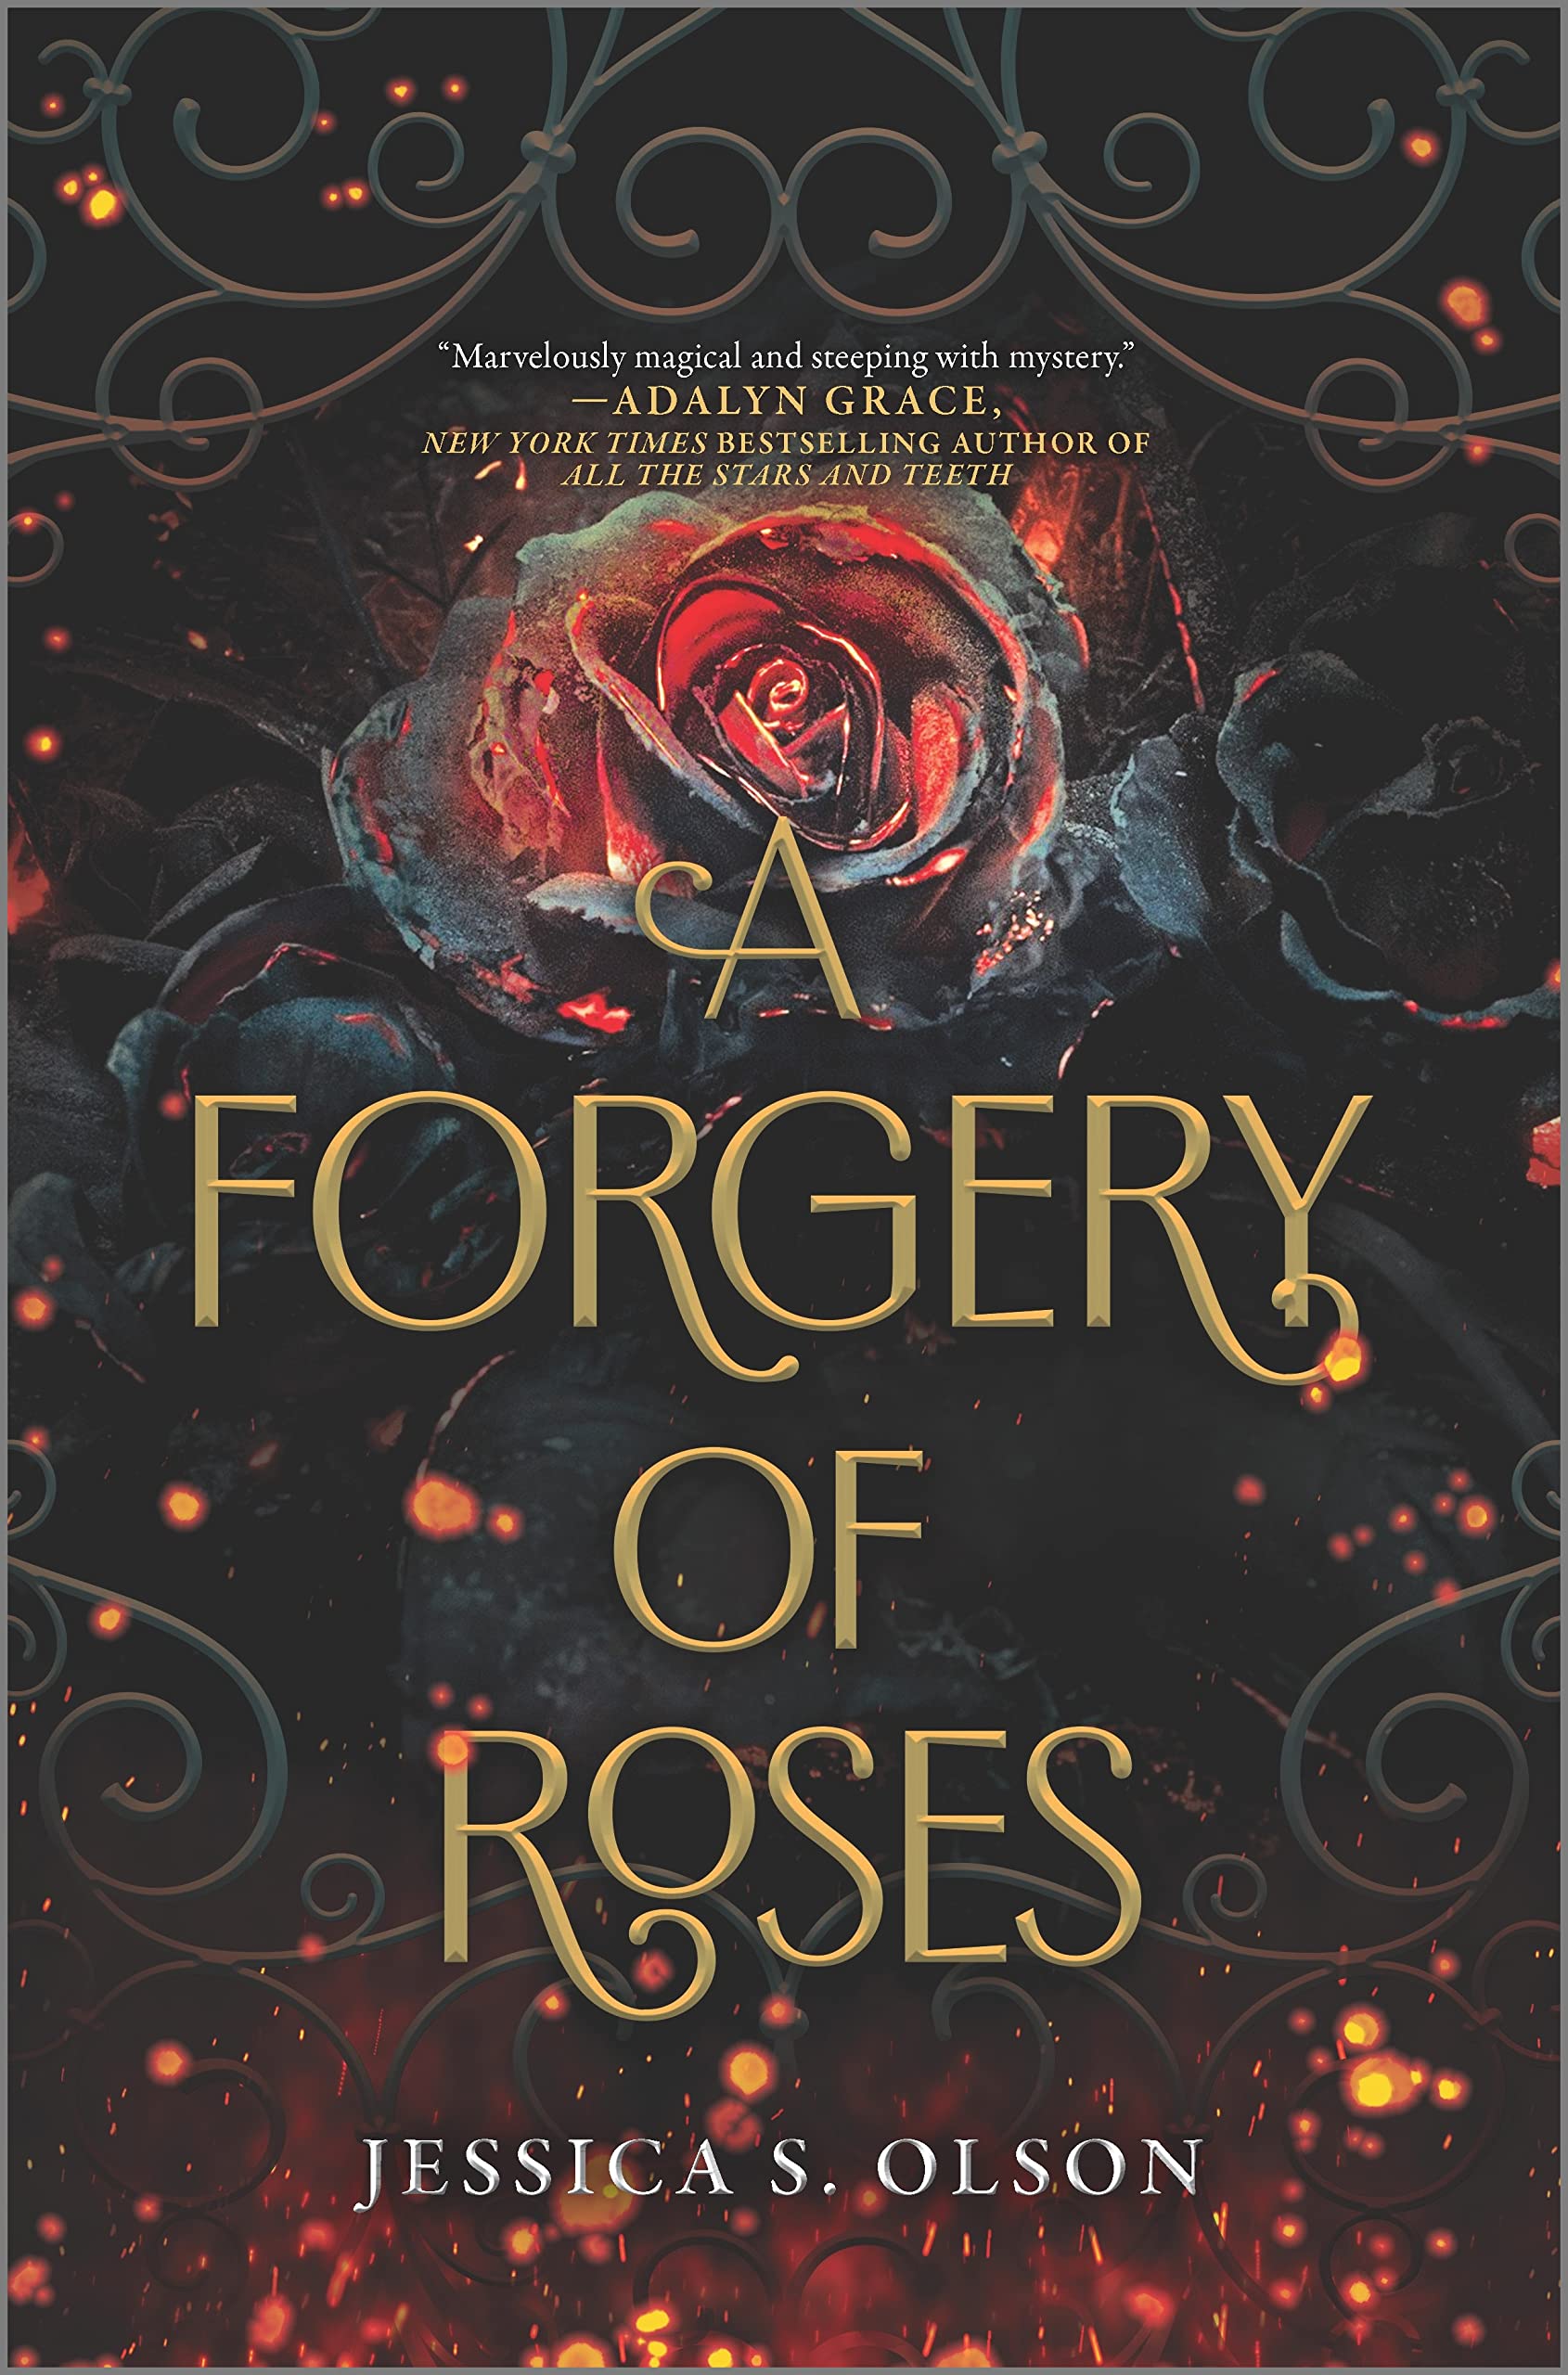 Cover of “A Forgery of Roses” by Jessica S. Olson